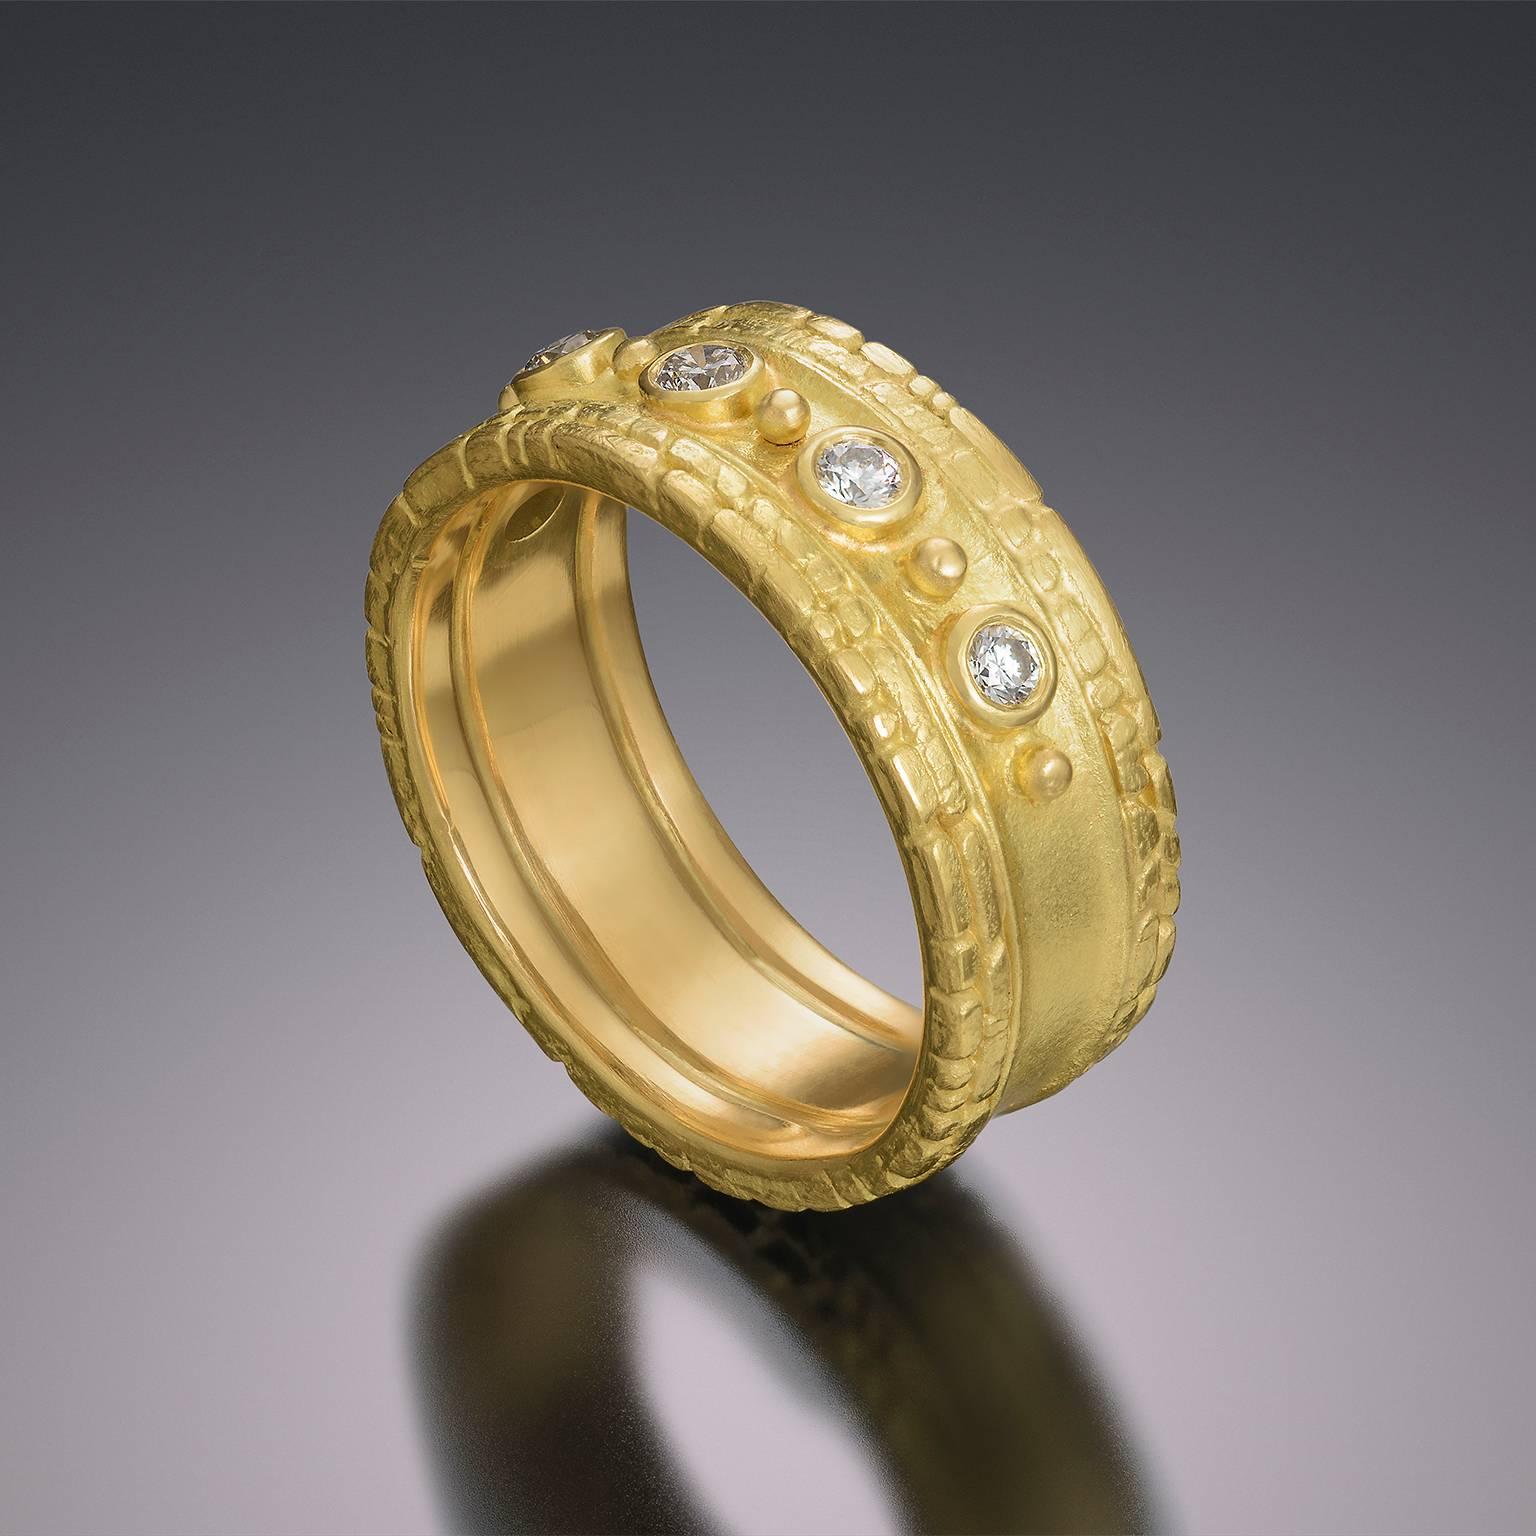 18tk Gold Band with Five Round Diamonds and Granulation.

* Each piece is designed and crafted entirely by hand in the traditional way, using age old techniques and processes.

* Rings can be sized